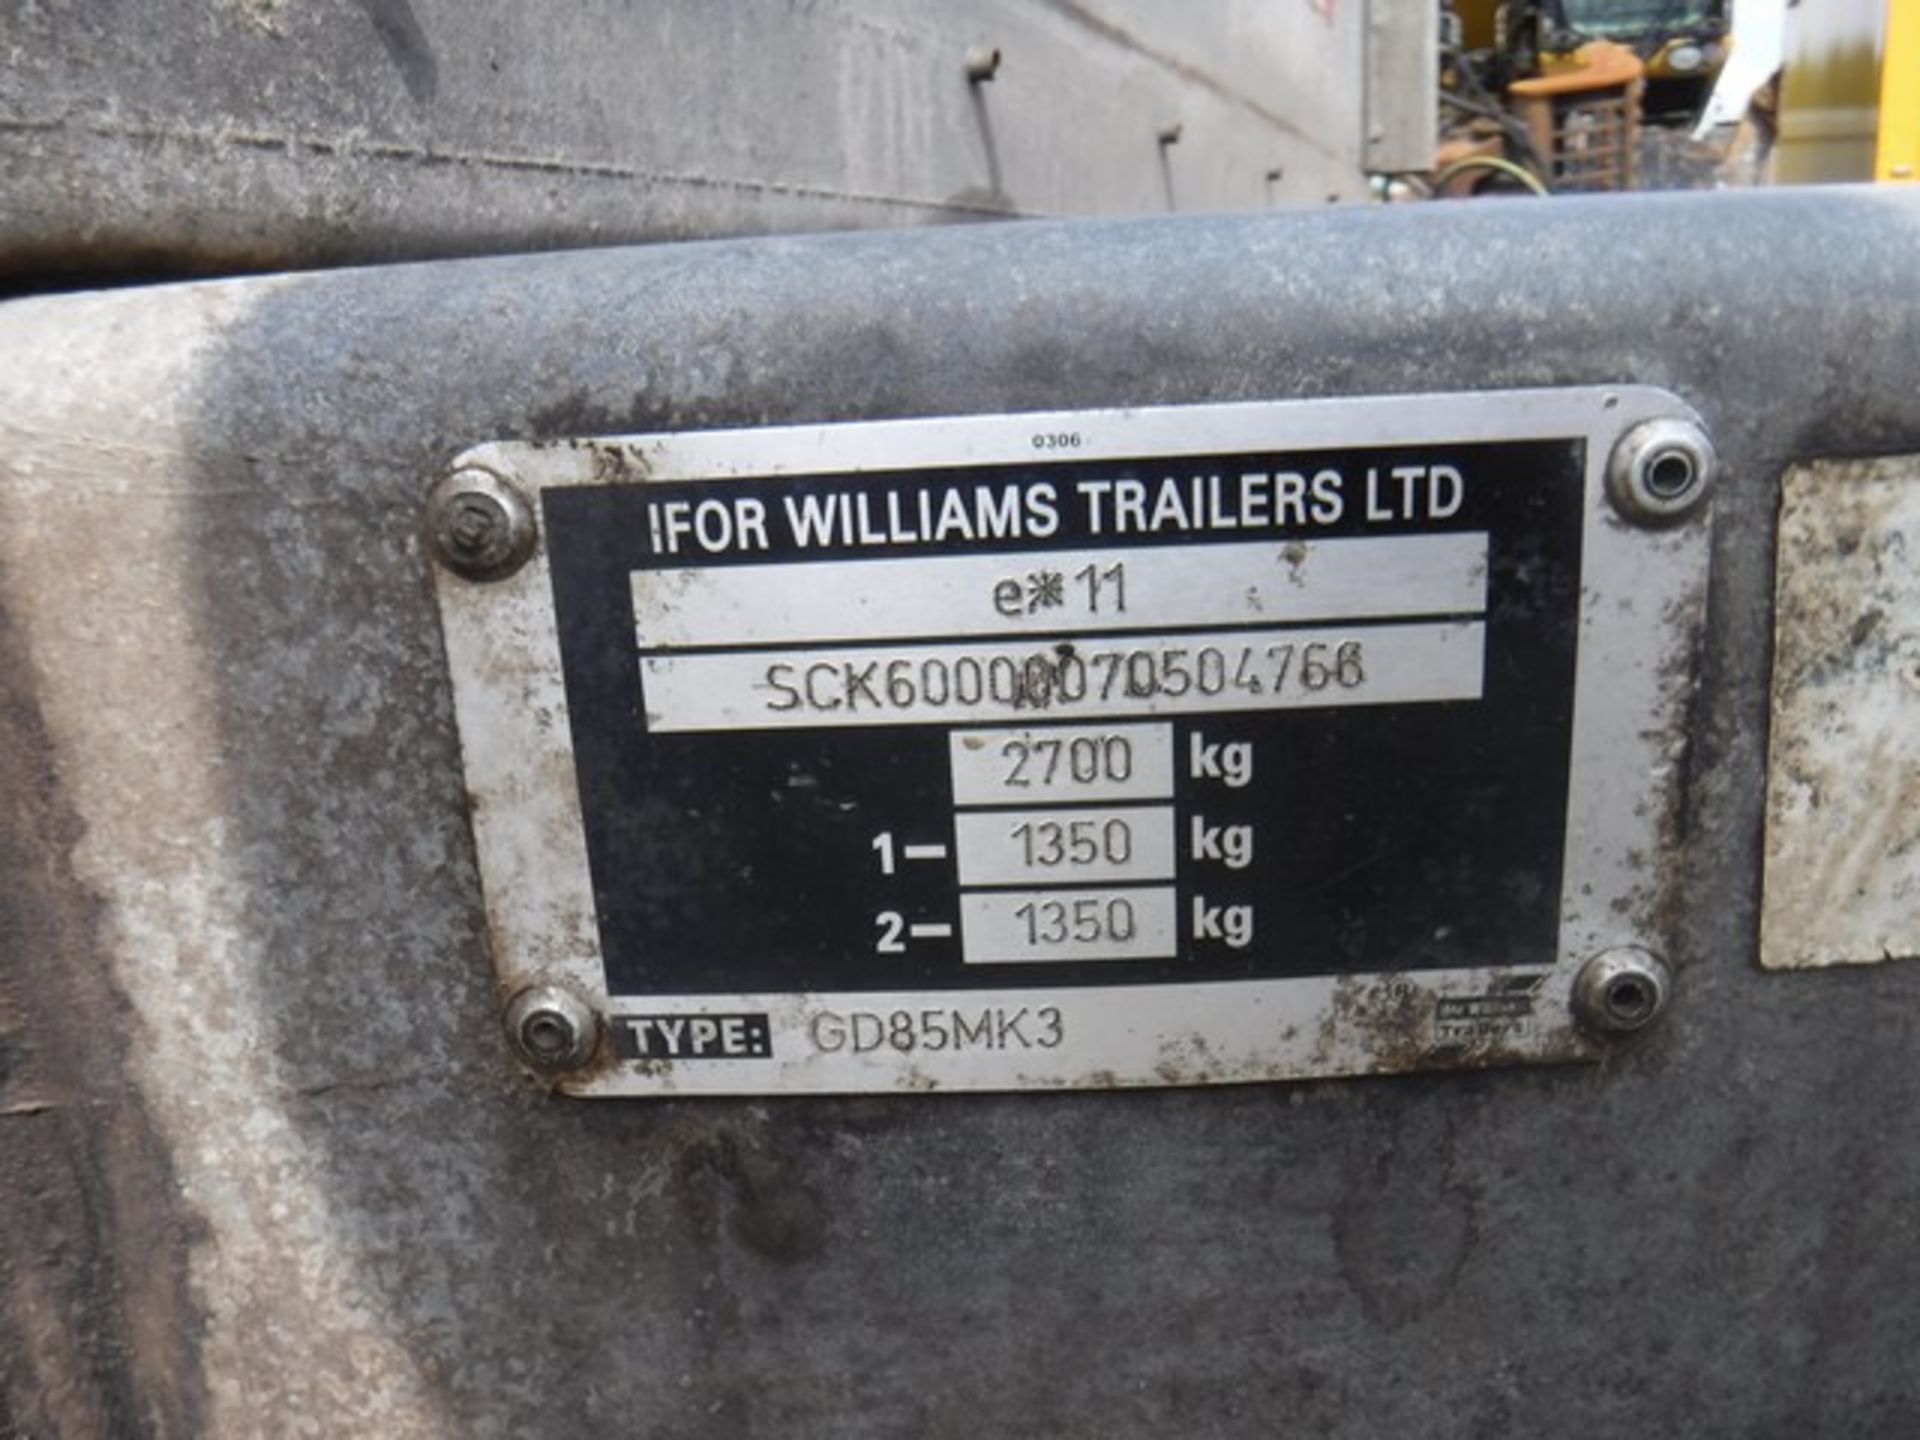 IFOR WILLIAMS 10x5 TWIN AXLE TRAILER - Image 3 of 5